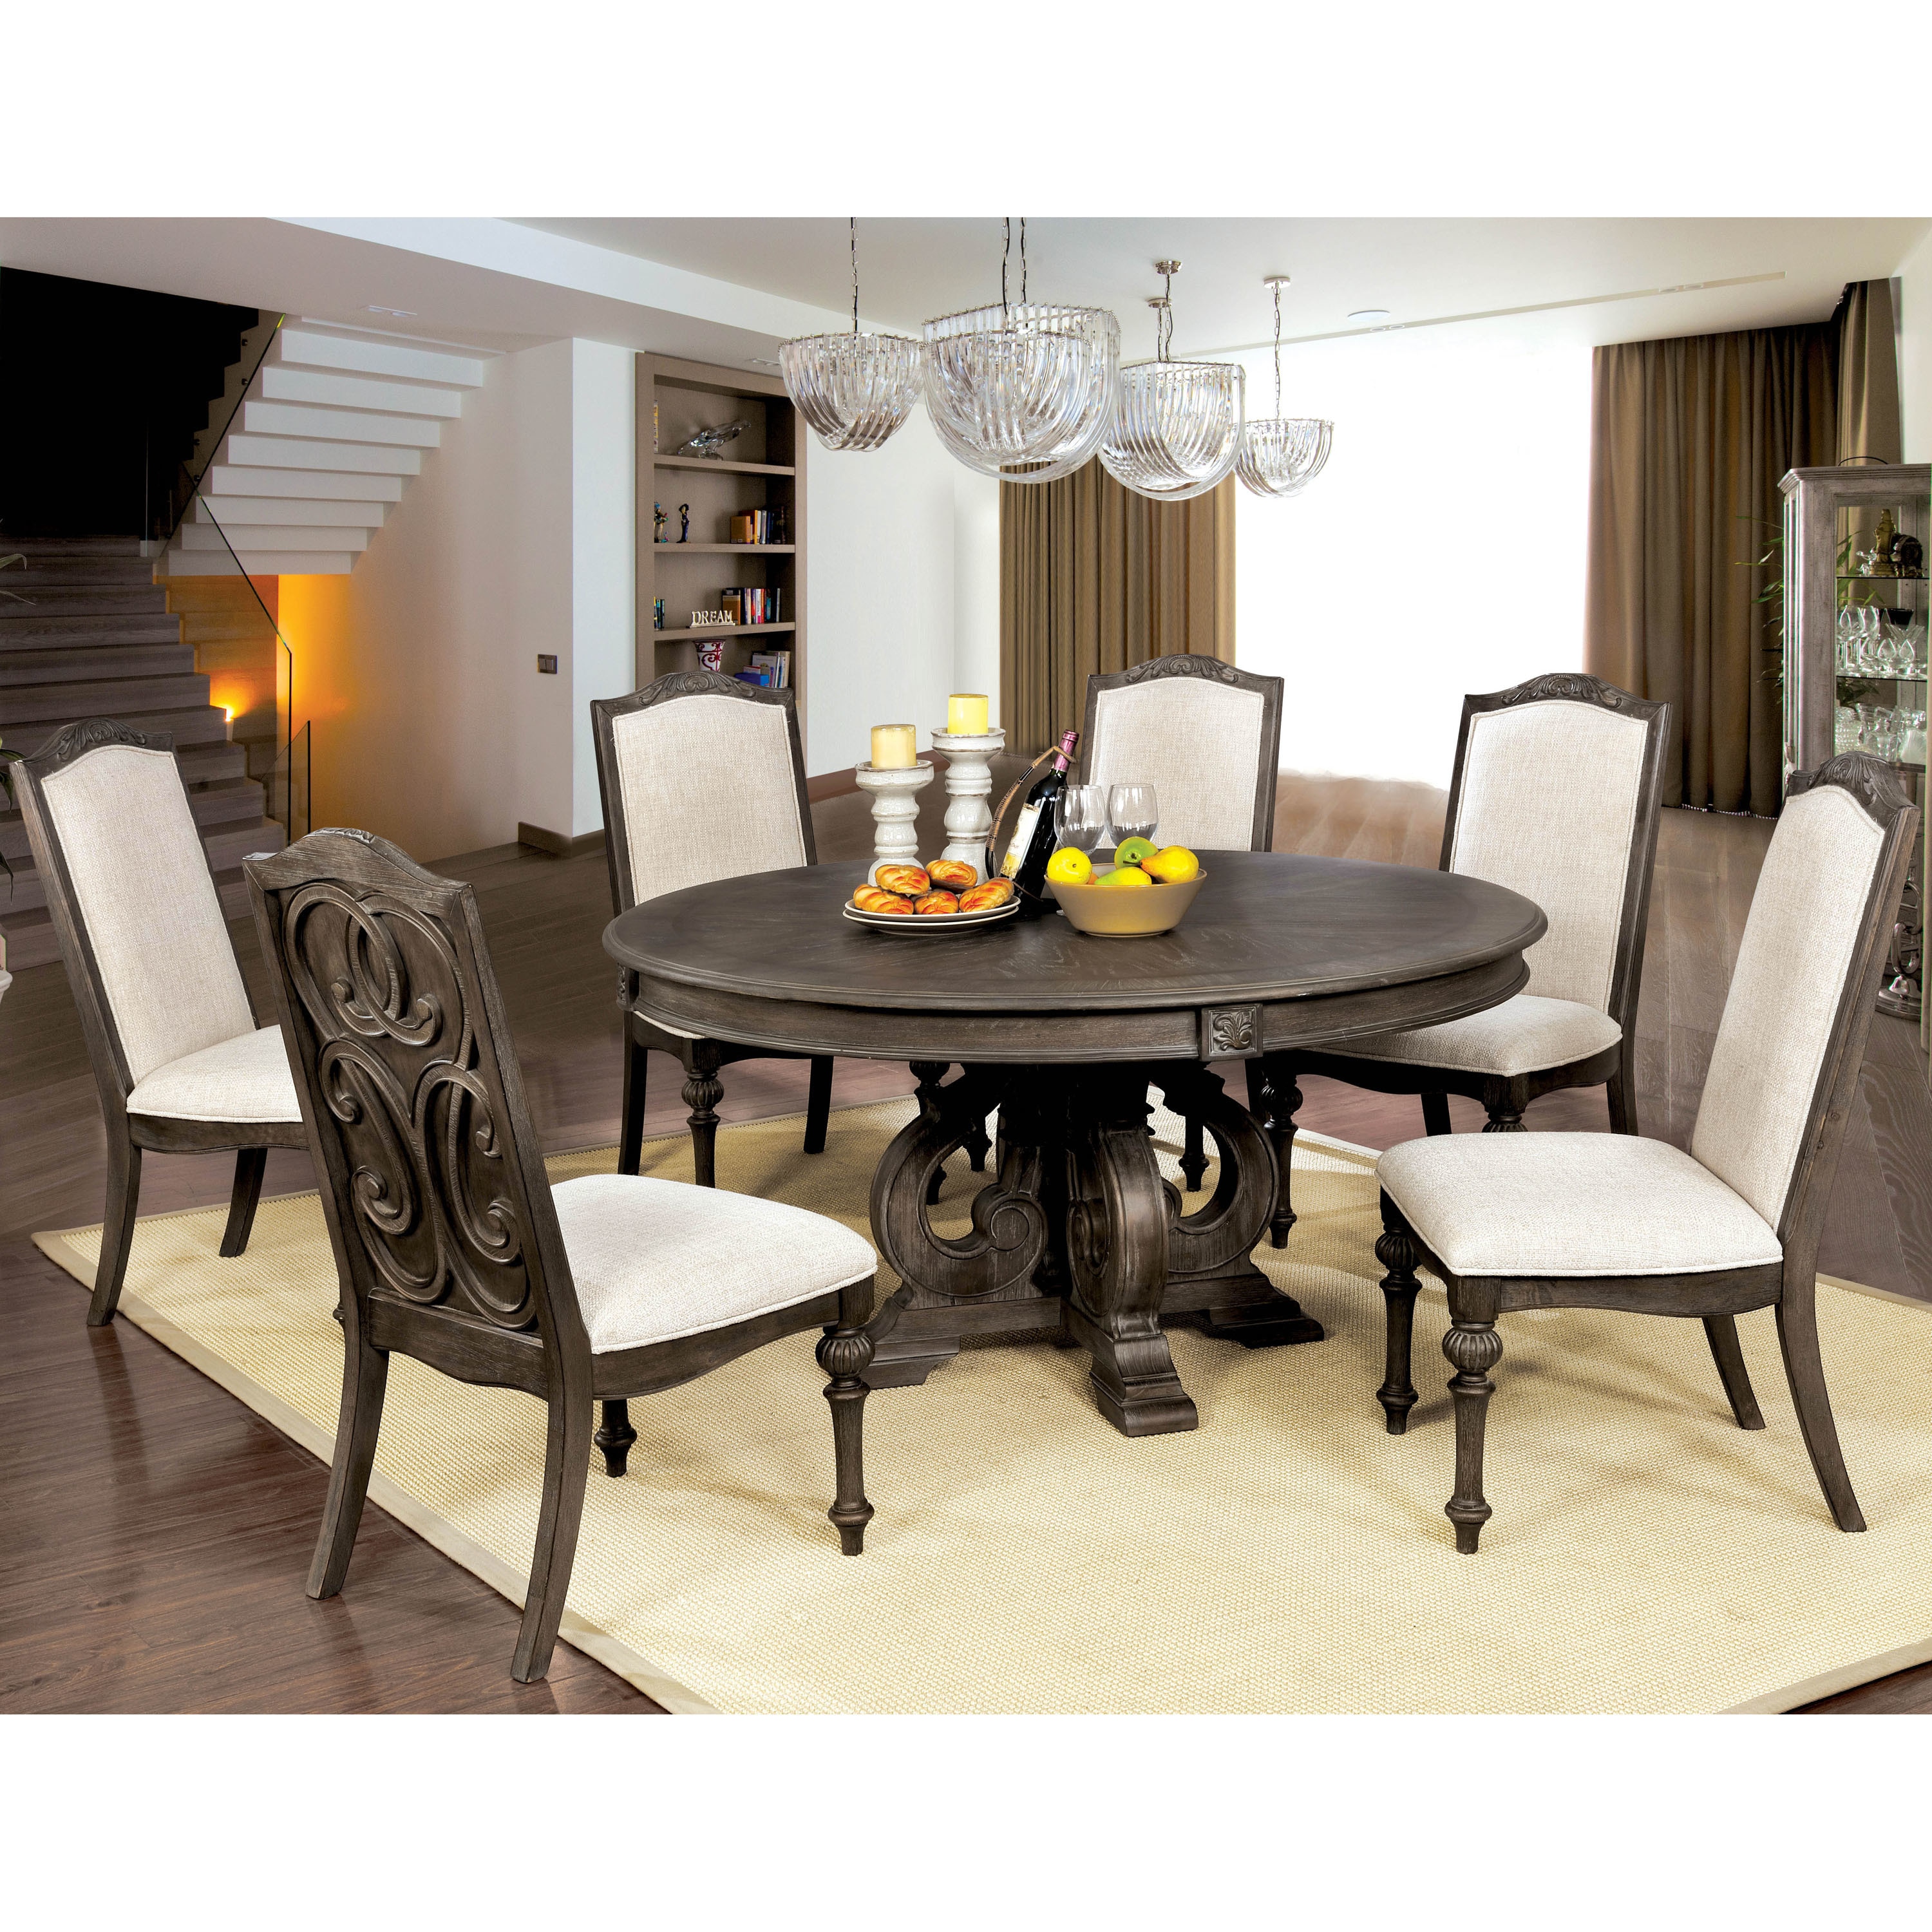 60 Inch Round Dining Room Table